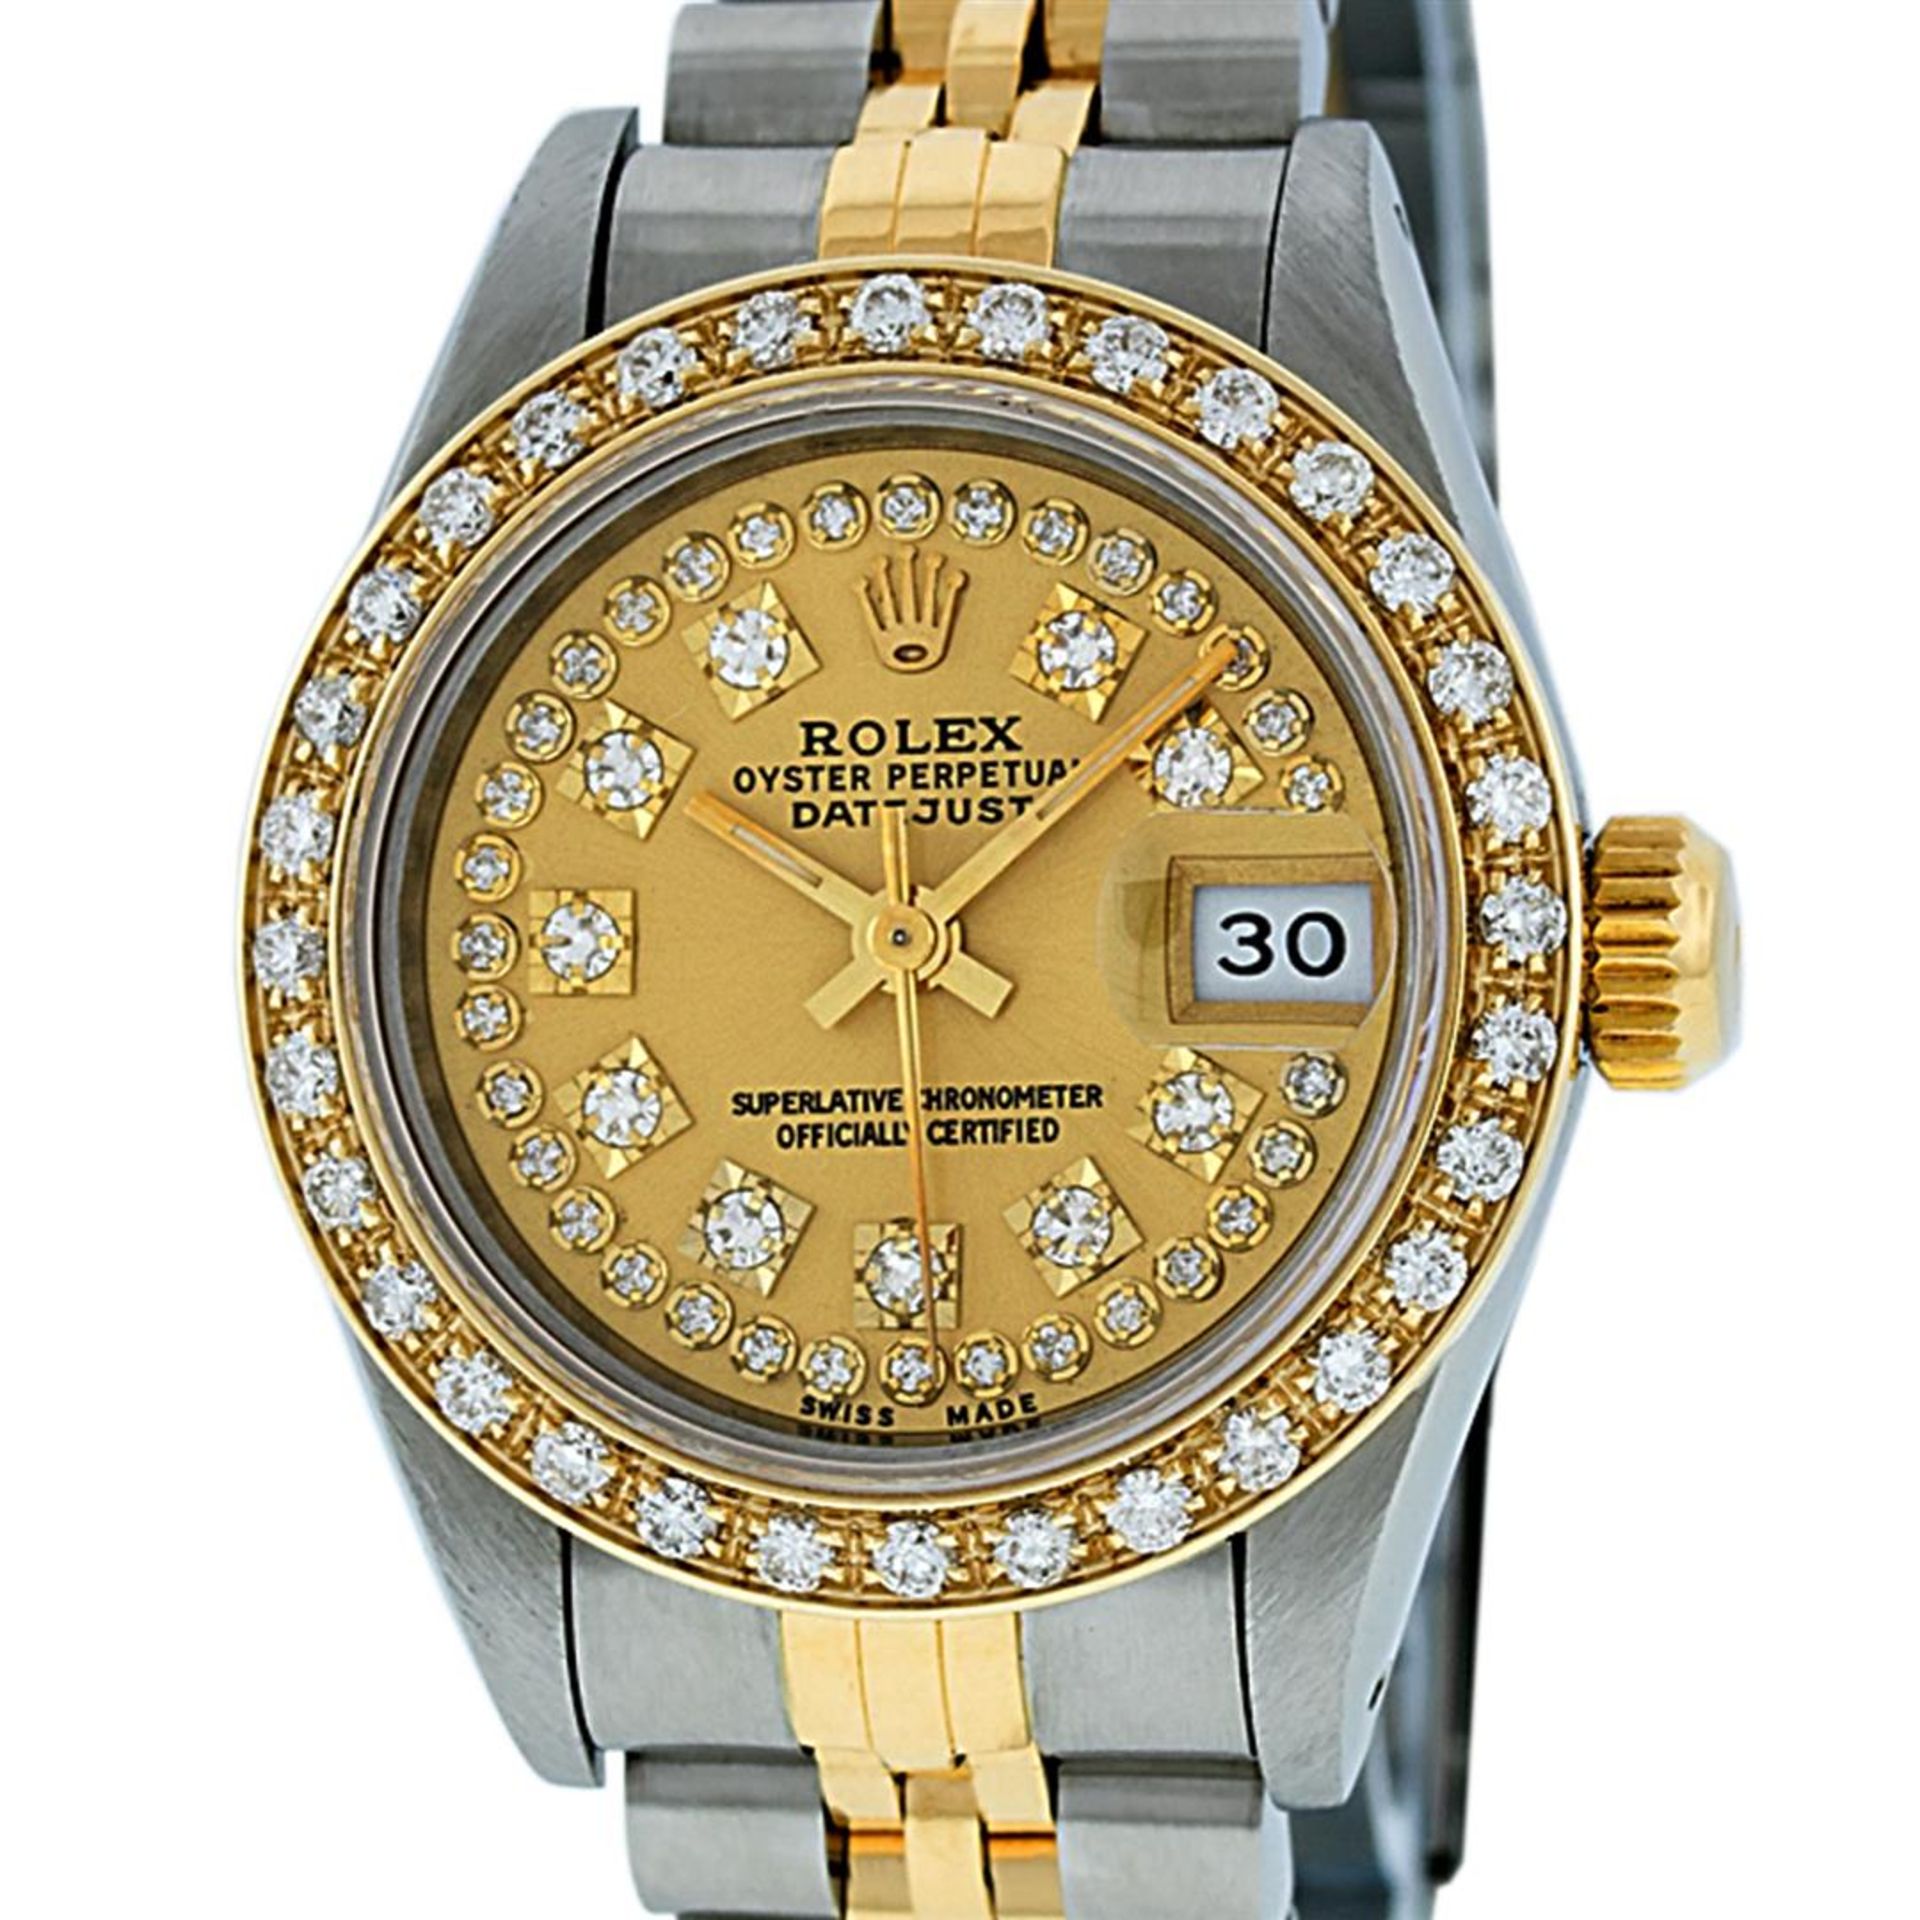 Rolex Ladies 2 Tone Champagne Diamond Oyster Perpetual Datejust Wriswatch 26MM - Image 6 of 9